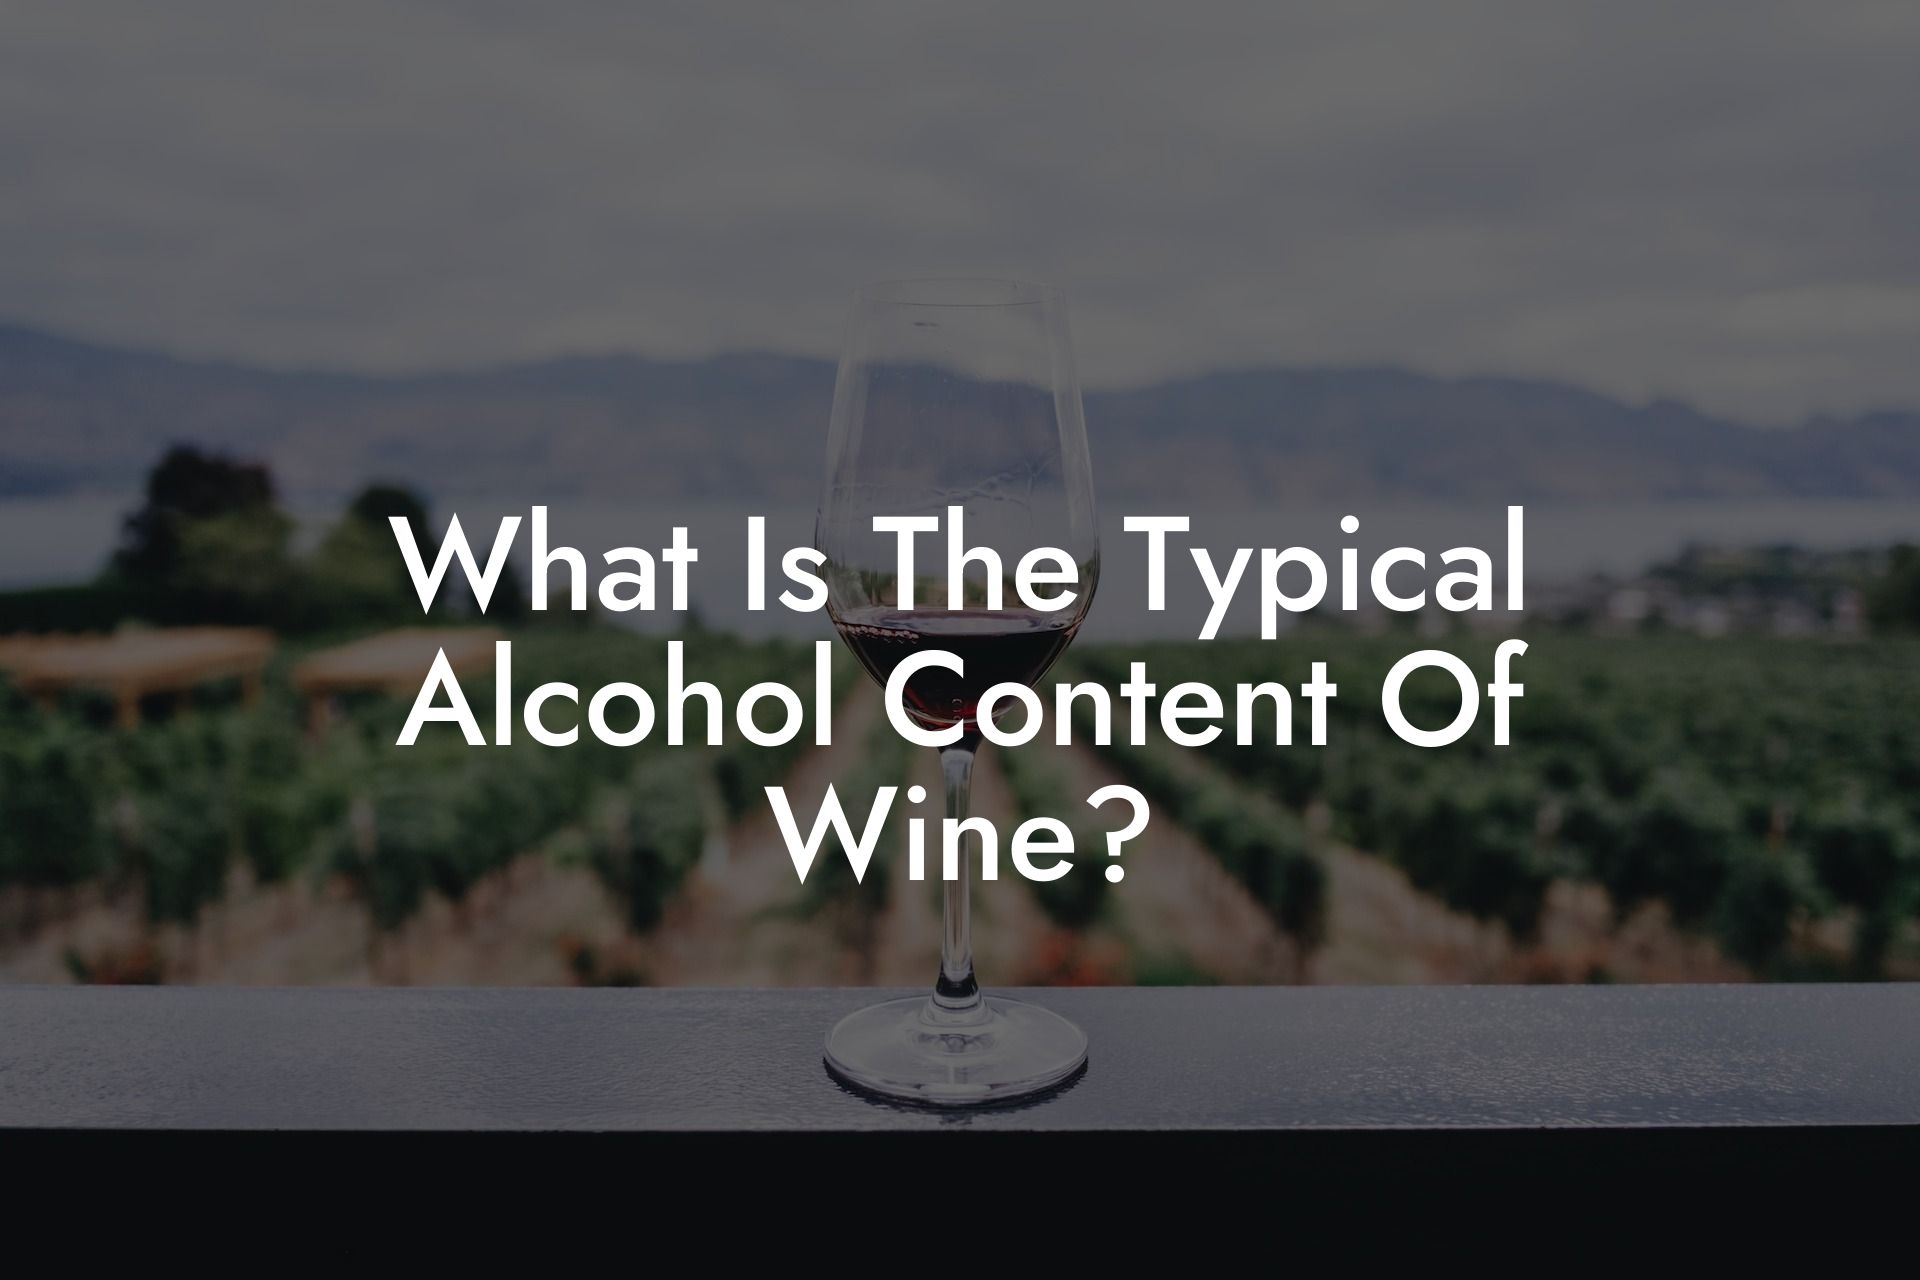 What Is The Typical Alcohol Content Of Wine?